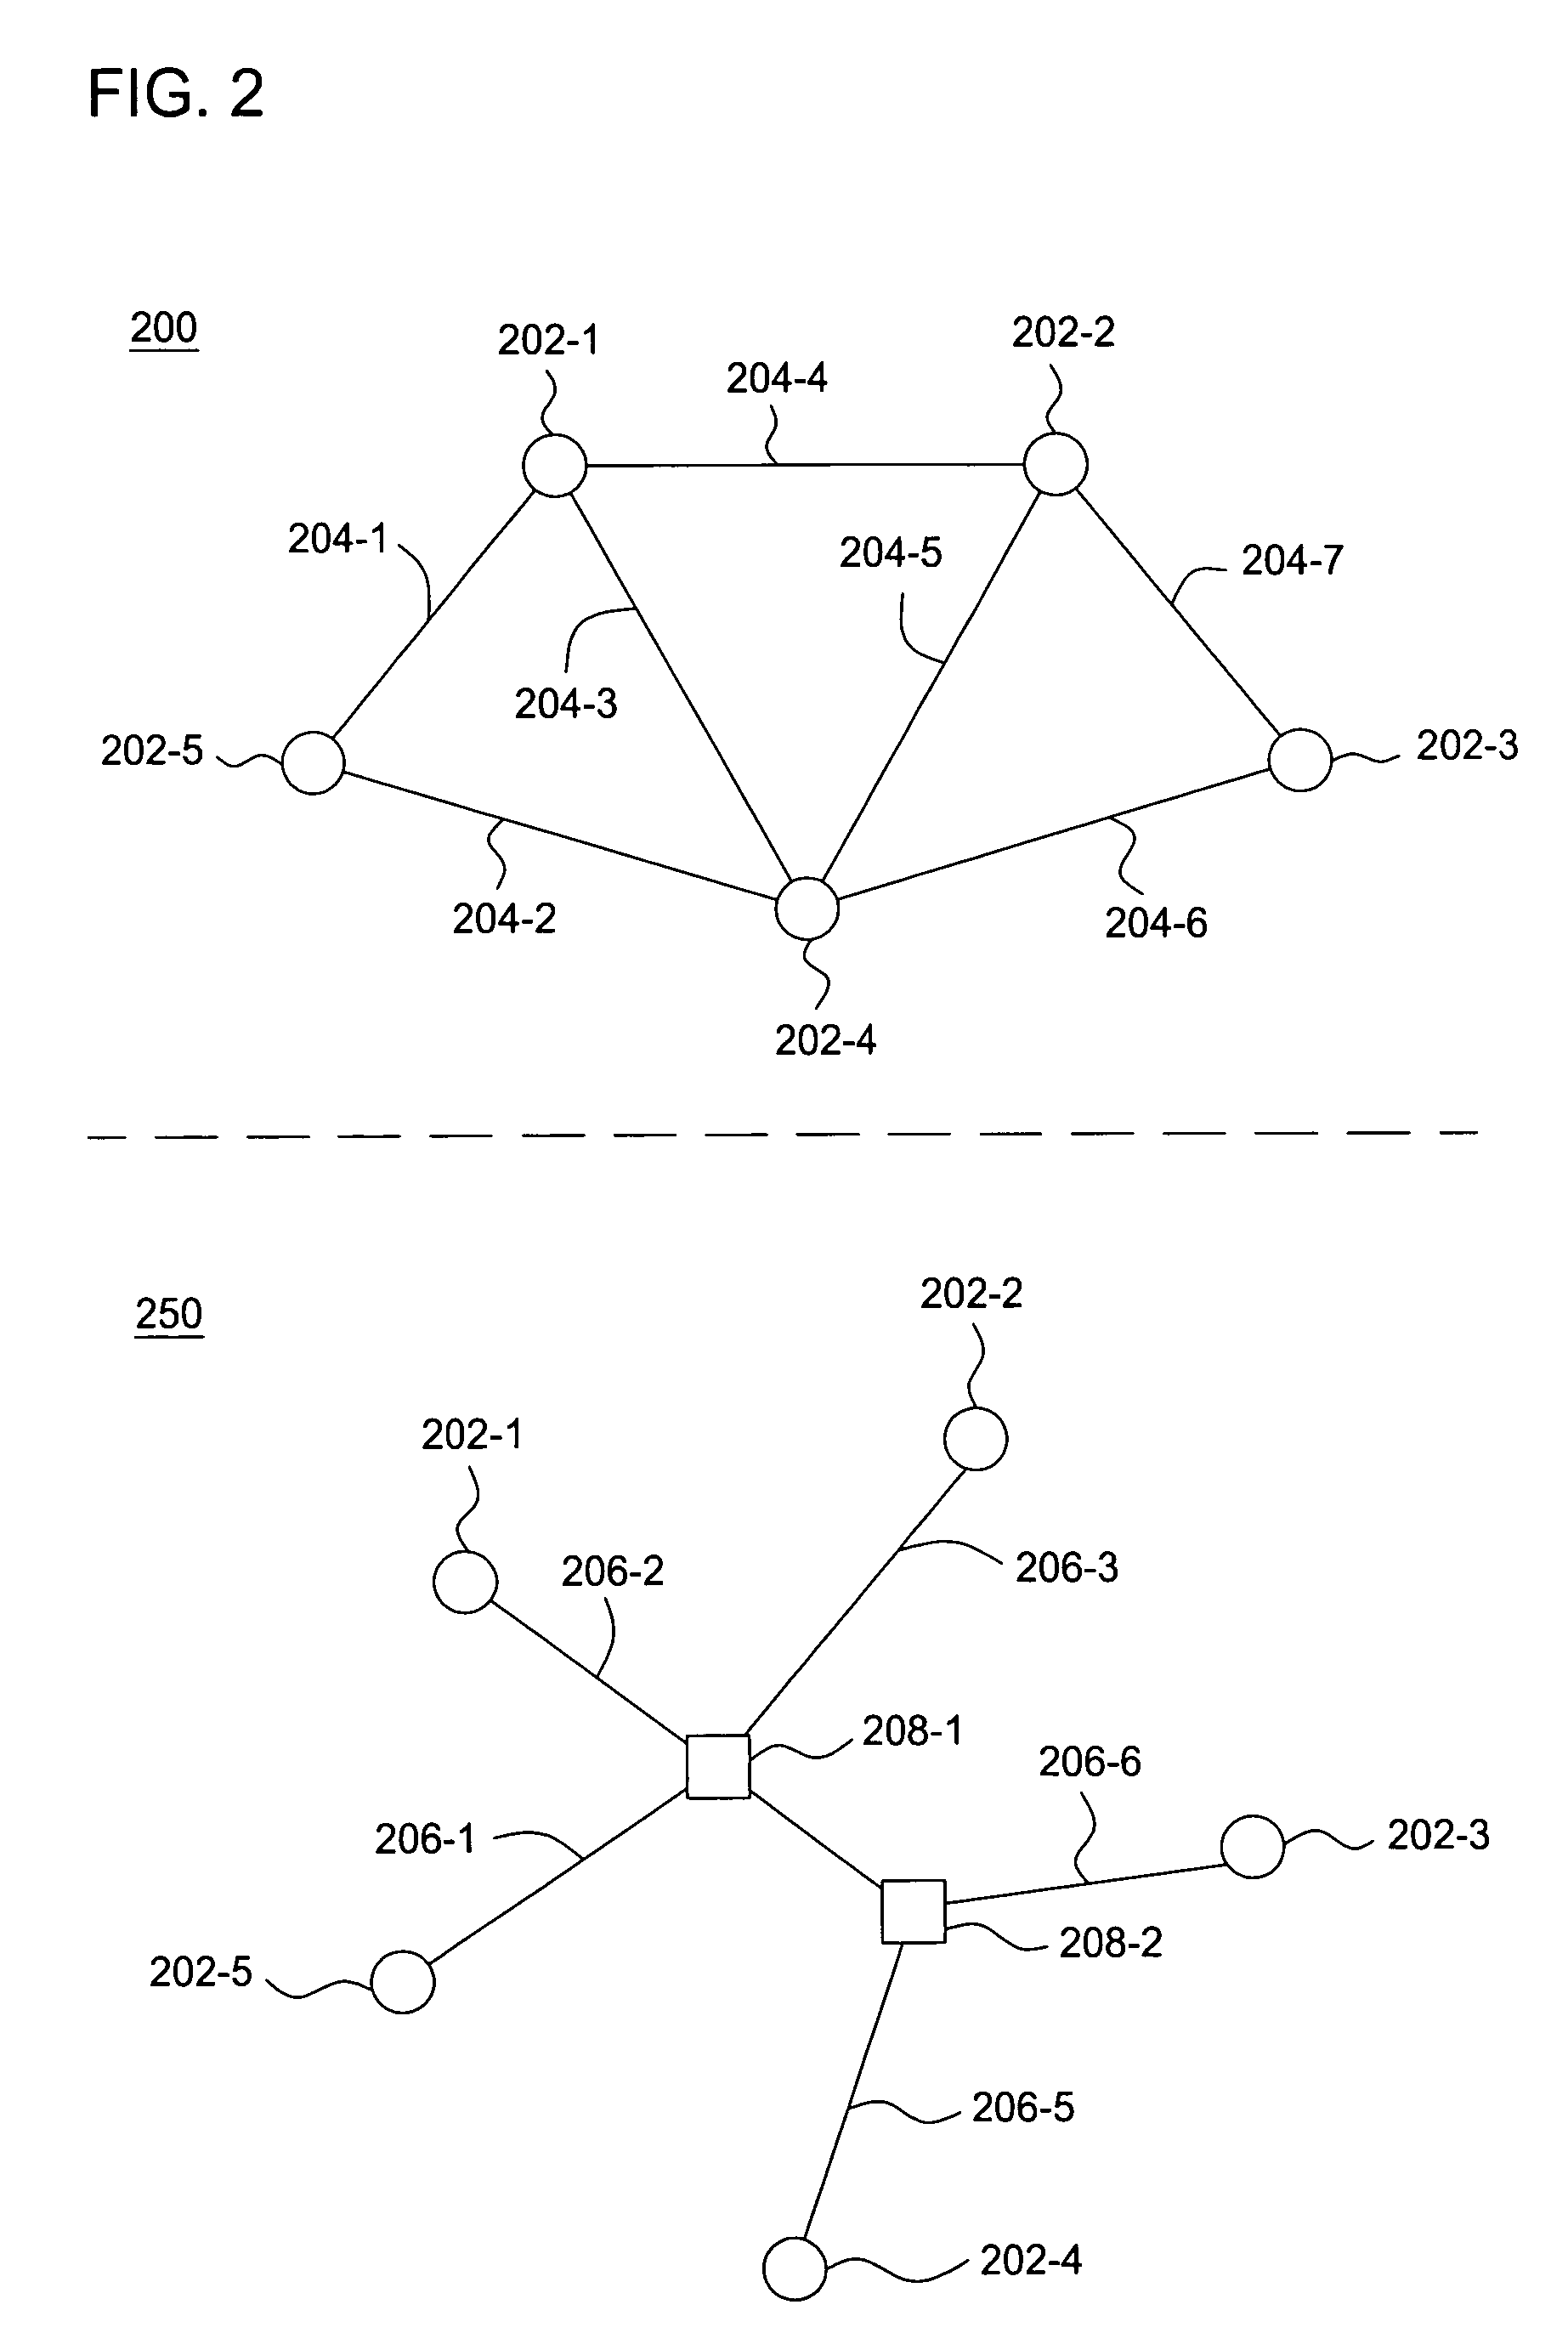 Method and apparatus for fault localization in a network